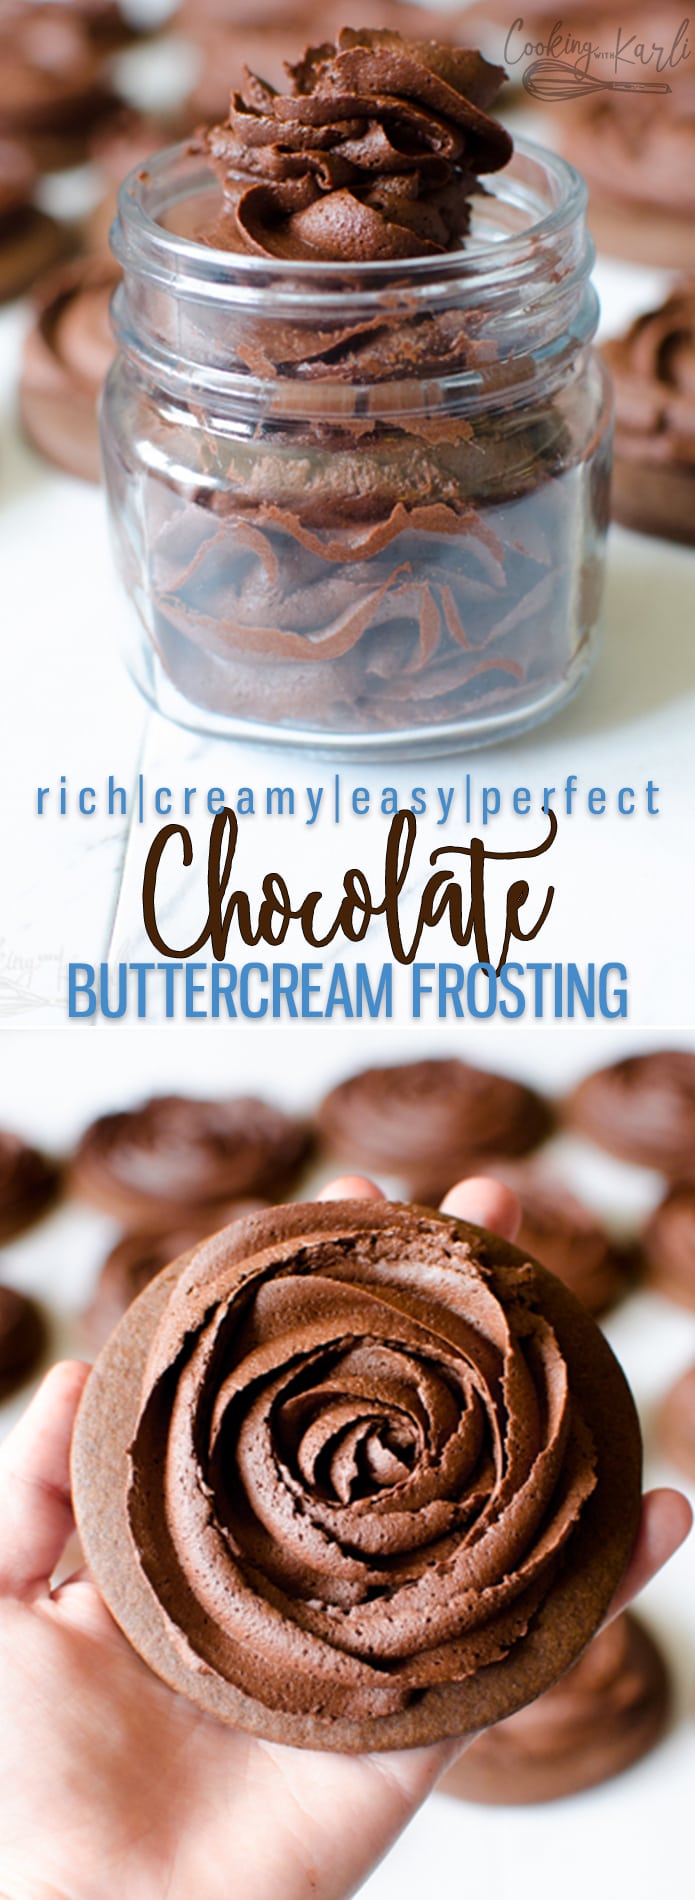  Chocolate Buttercream Frosting is rich, creamy and pip-able. This frosting is perfect for cakes, brownies, cookies or your spoon.  Chocolate Buttercream Frosting is the best chocolate frosting I've ever tasted! |Cooking with Karli| #chocolate #frosting #buttercream 